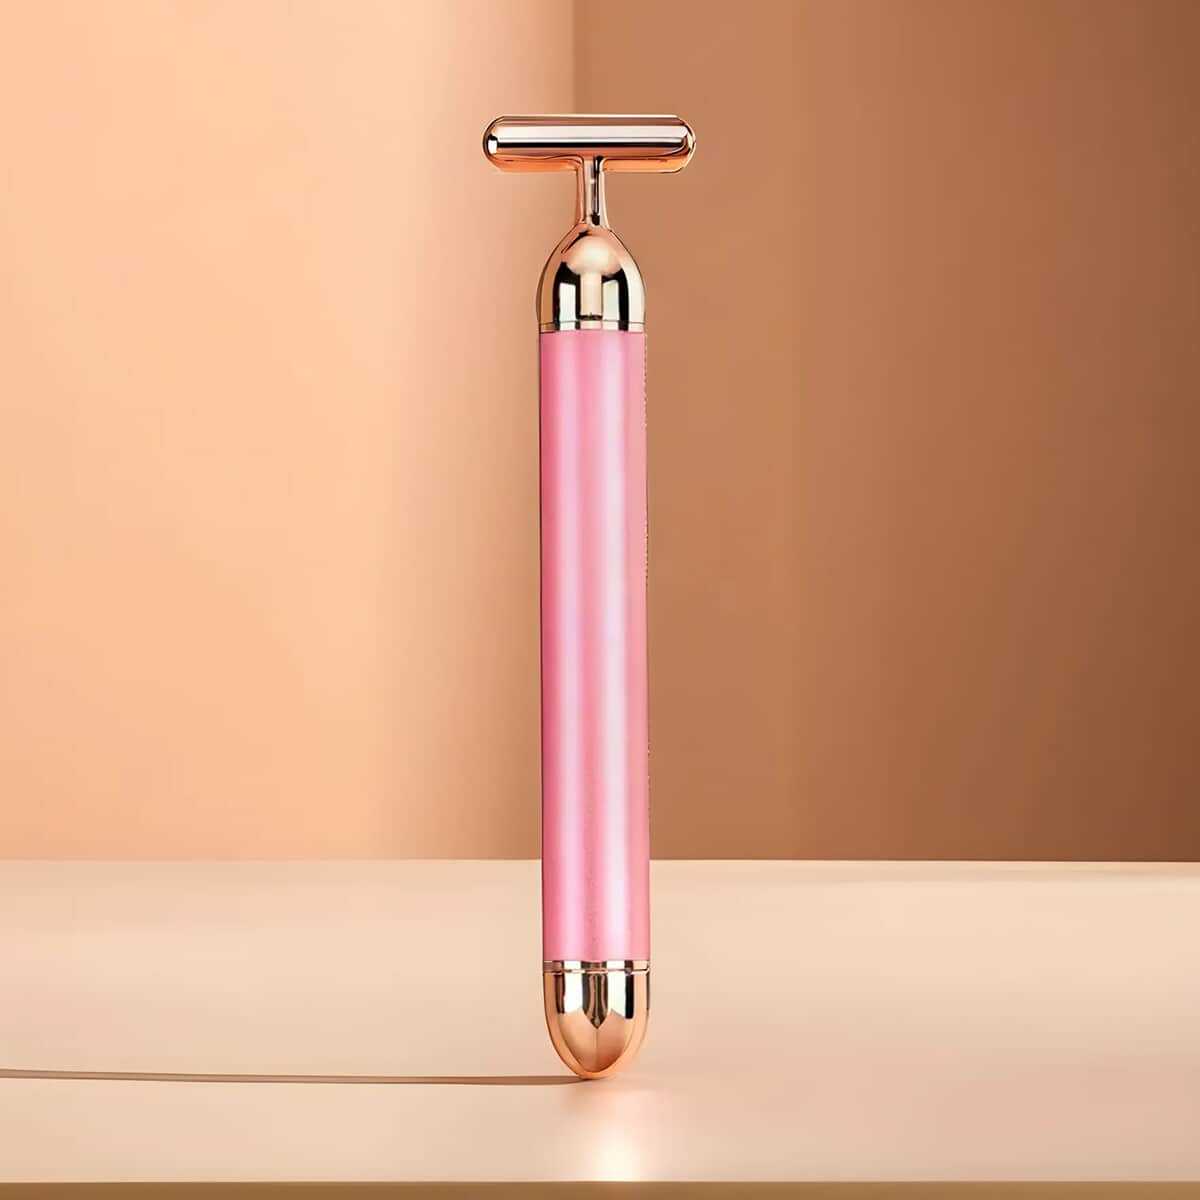 4-in-1 Face Massager Rollers with Four Interchangeable Massage Heads - Rose Gold (5.9"x1.49"), 1xAA Battery Not Including image number 1